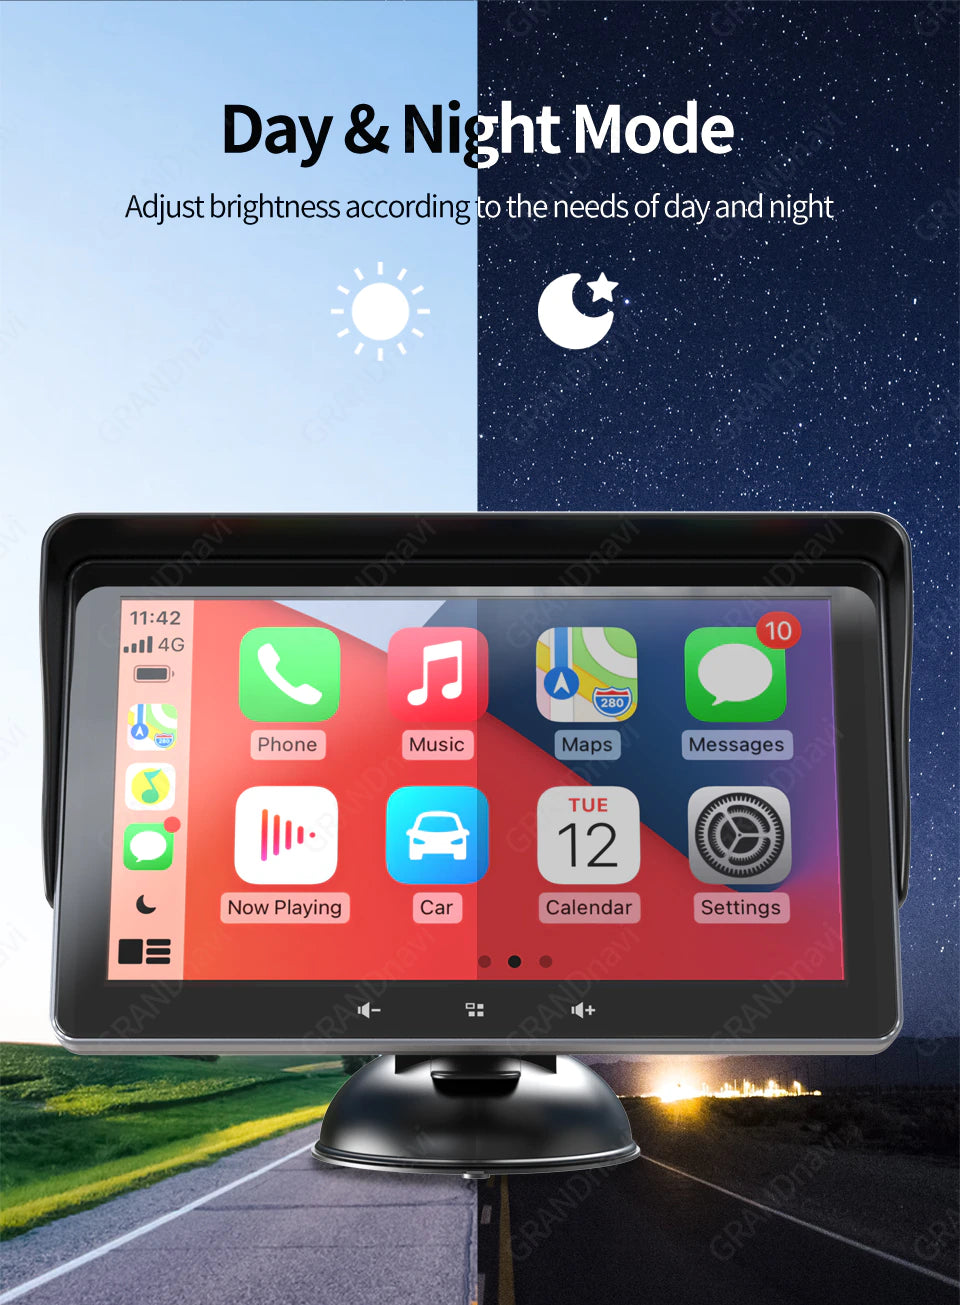 K-Play Pad2 (7 INCH TOUCH SCREEN PORTABLE WIRELESS CAR PLAY)